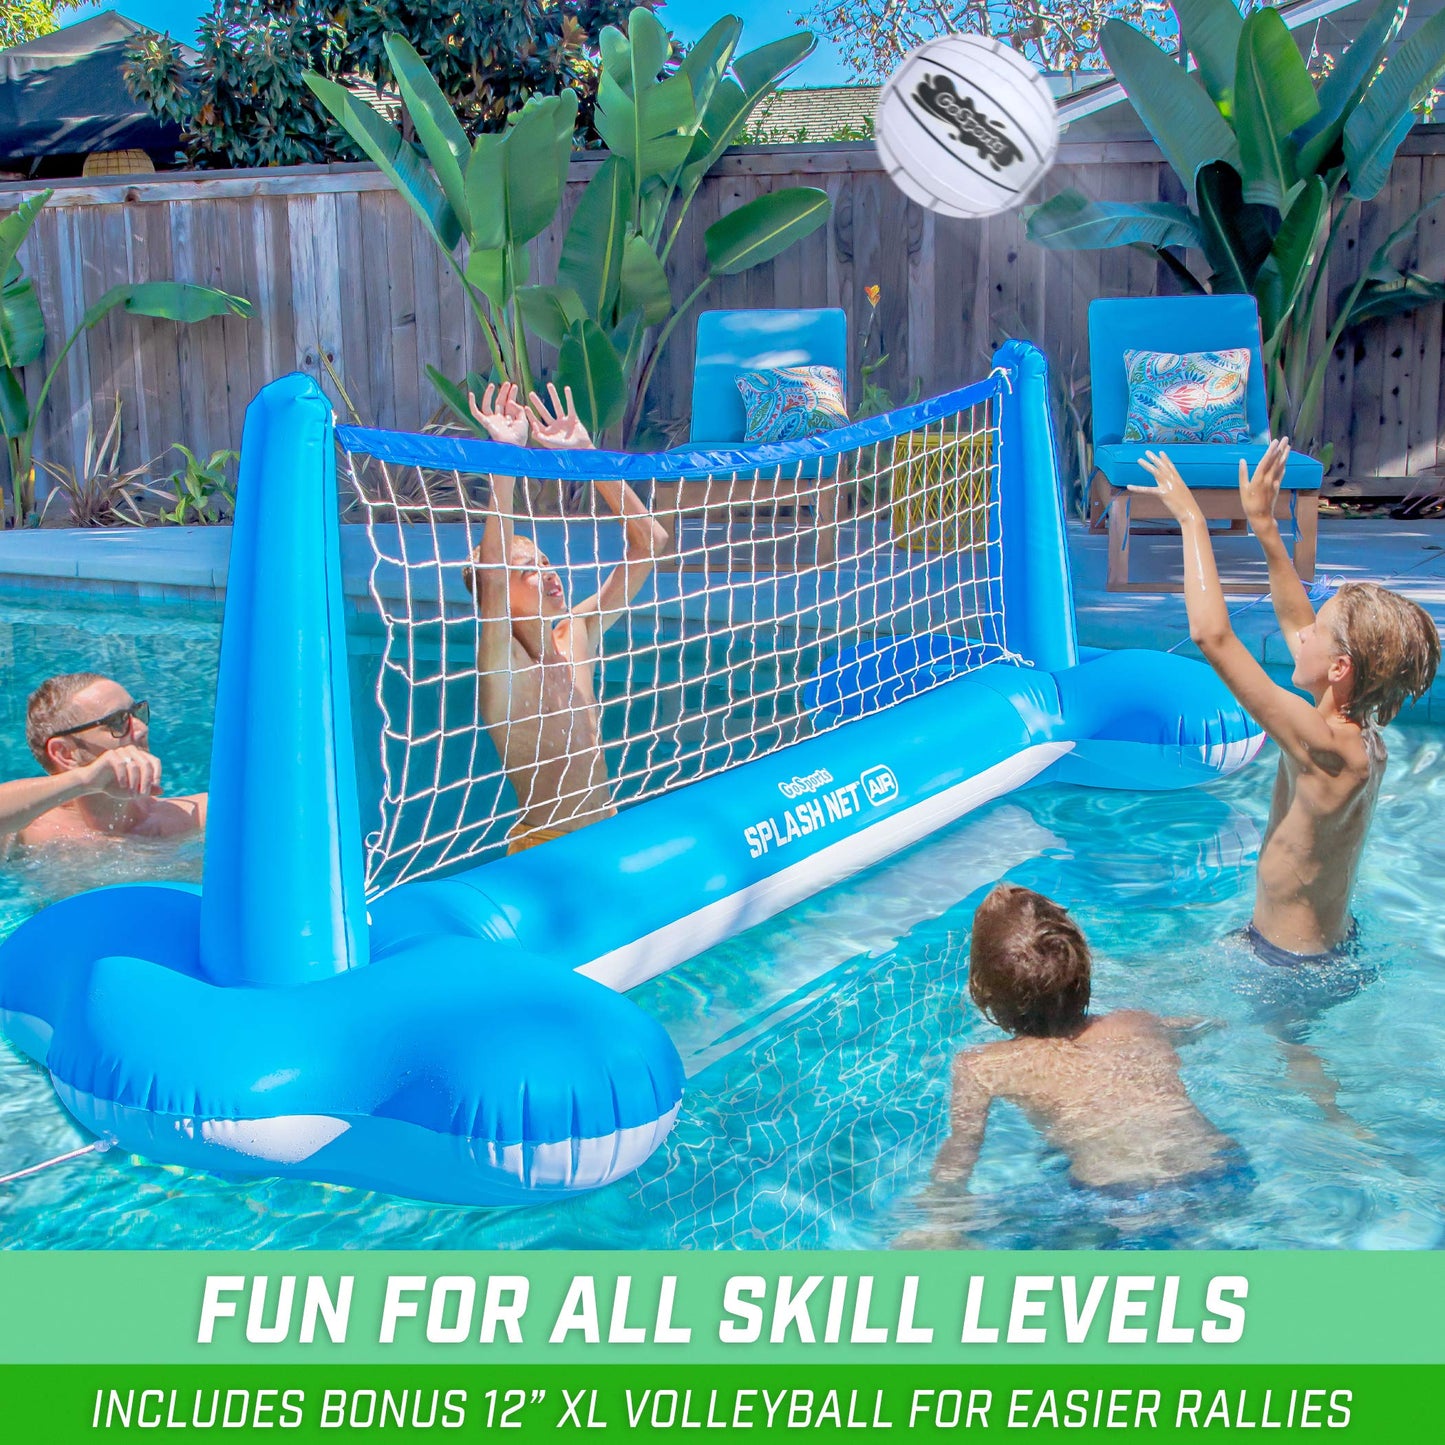 GoSports Splash Net Air, Inflatable Pool Volleyball Game - Includes Floating Net, Water Volleyballs and Ball Pump